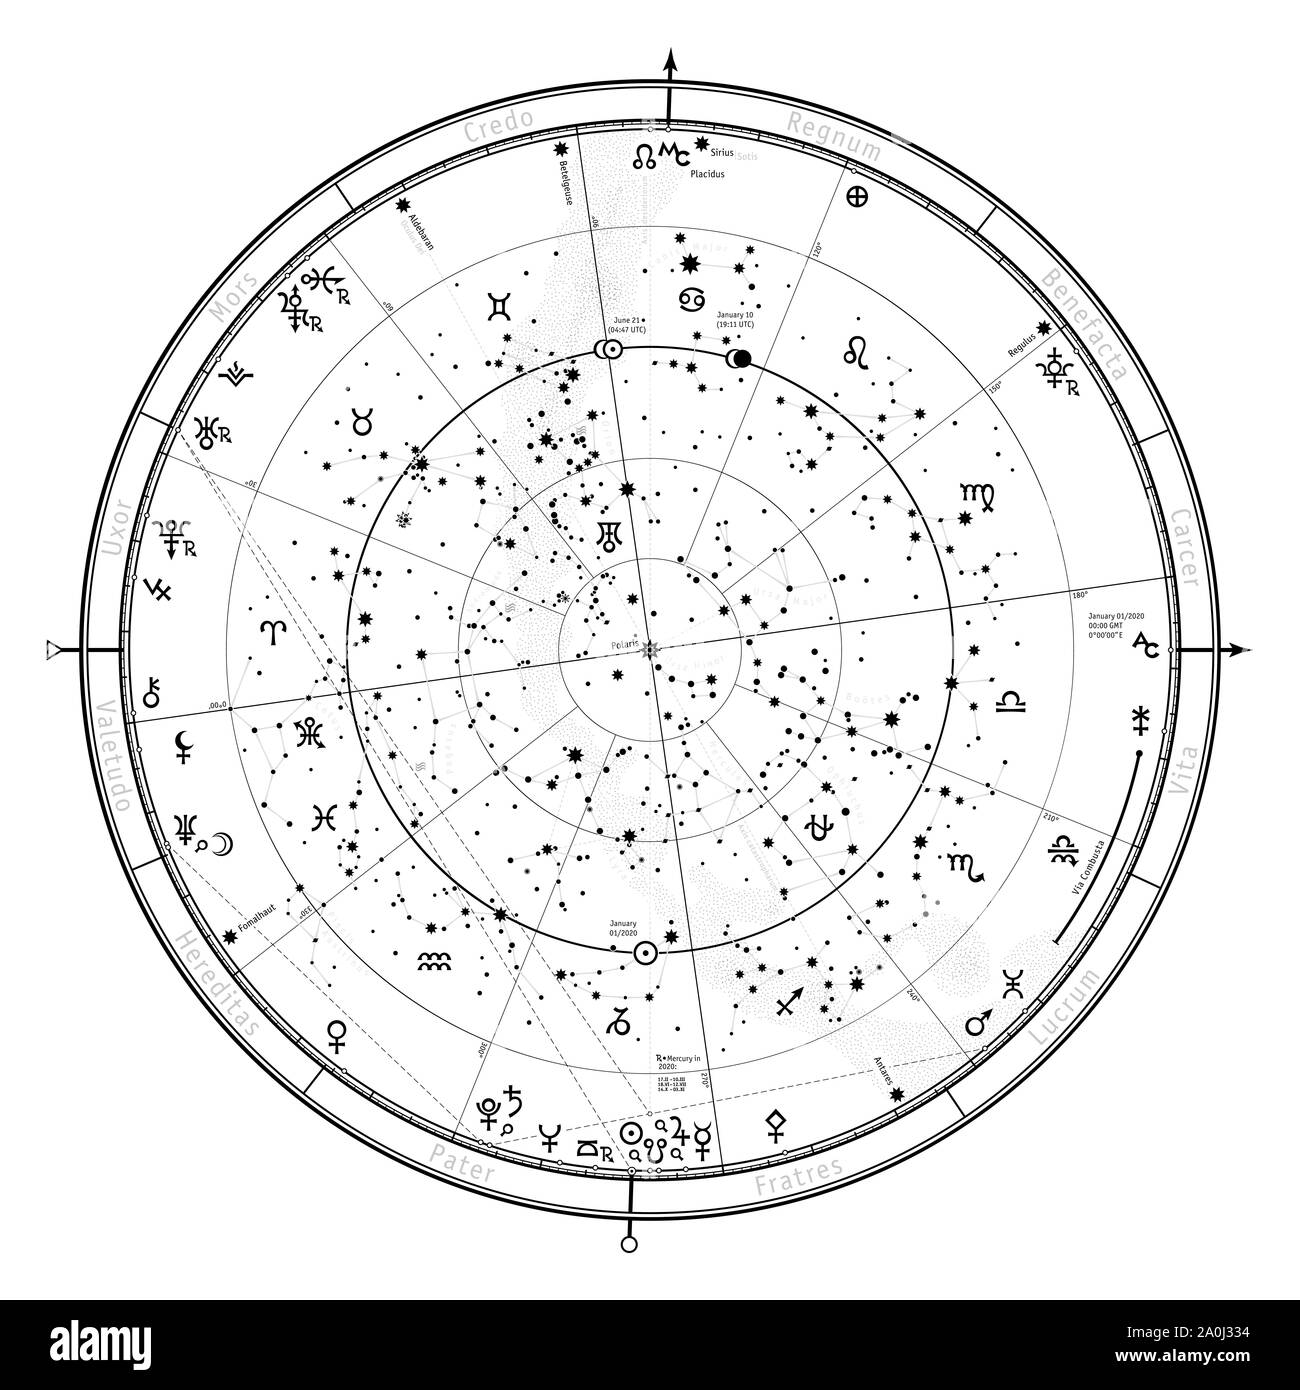 Astrological Celestial Map of The Northern Hemisphere. The General Global Universal Horoscope on January 1, 2020 (00:00 GMT). Detailed sky chart. Stock Photo